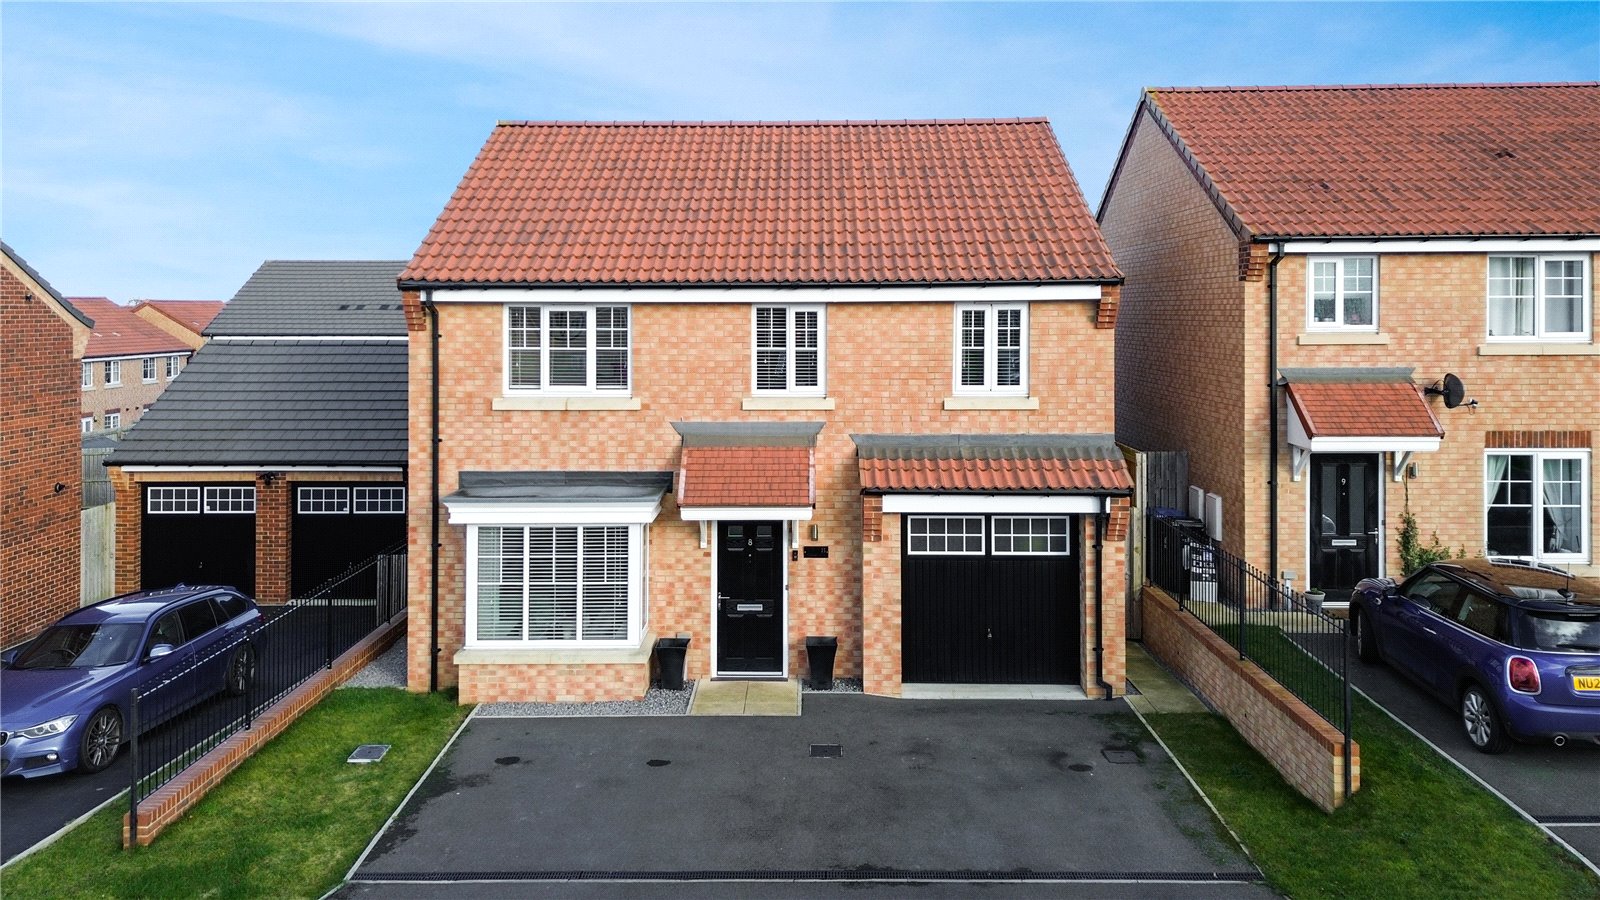 4 bed house for sale in Waterlily Close, Stainton 1